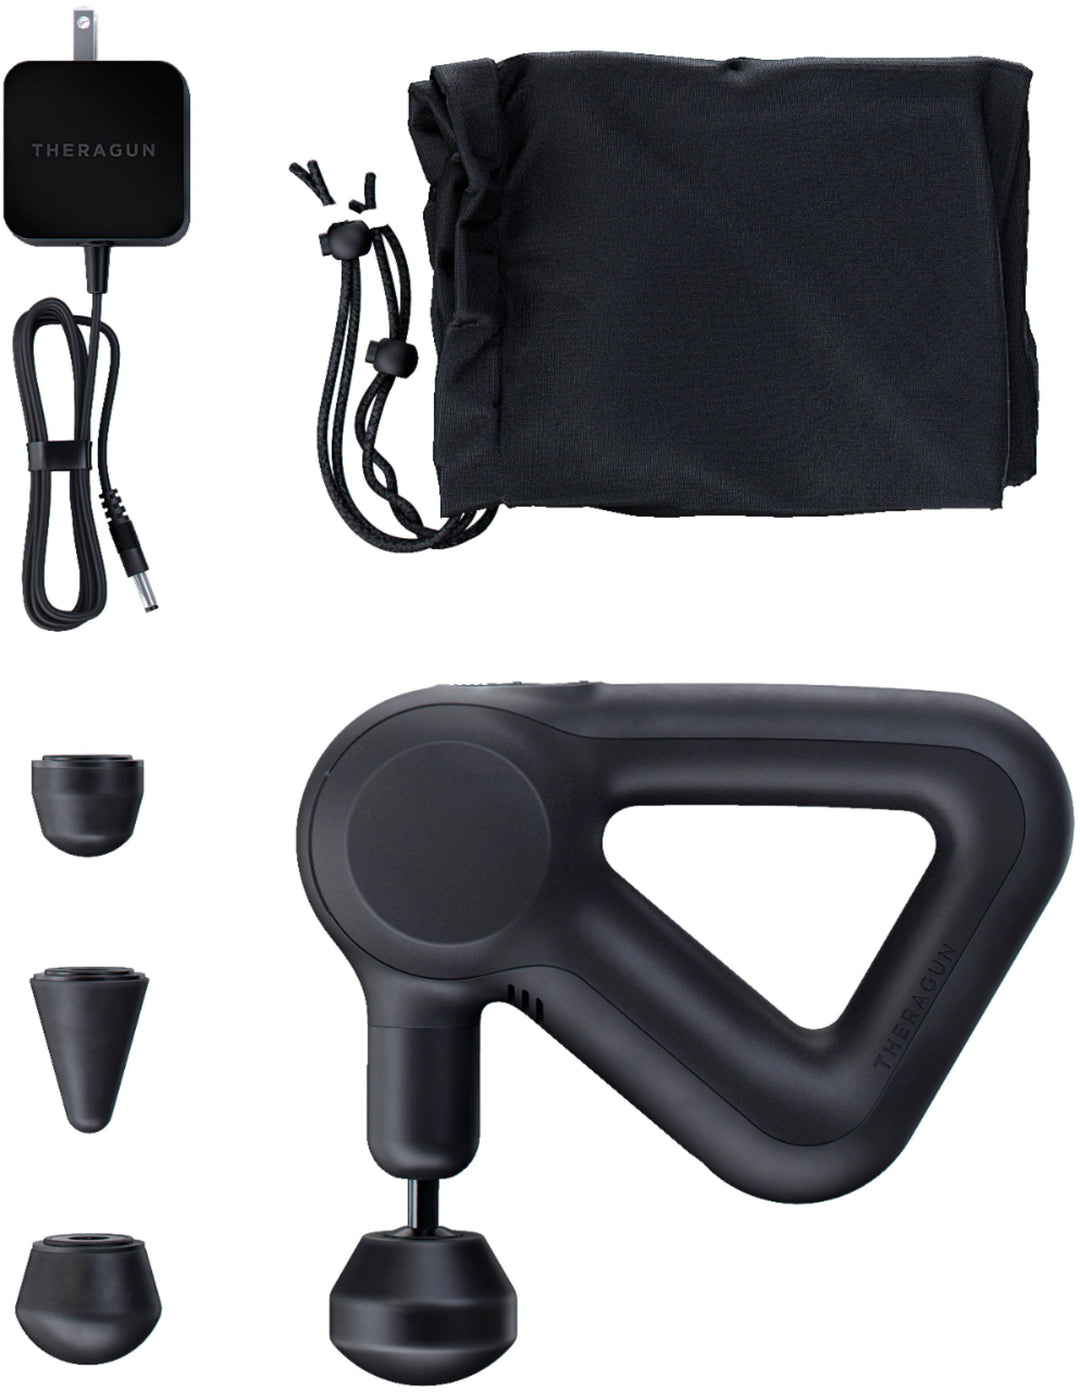 Therabody - Theragun Prime Handheld Percussive Massage Device (Latest Model) with Travel Pouch - Black_8